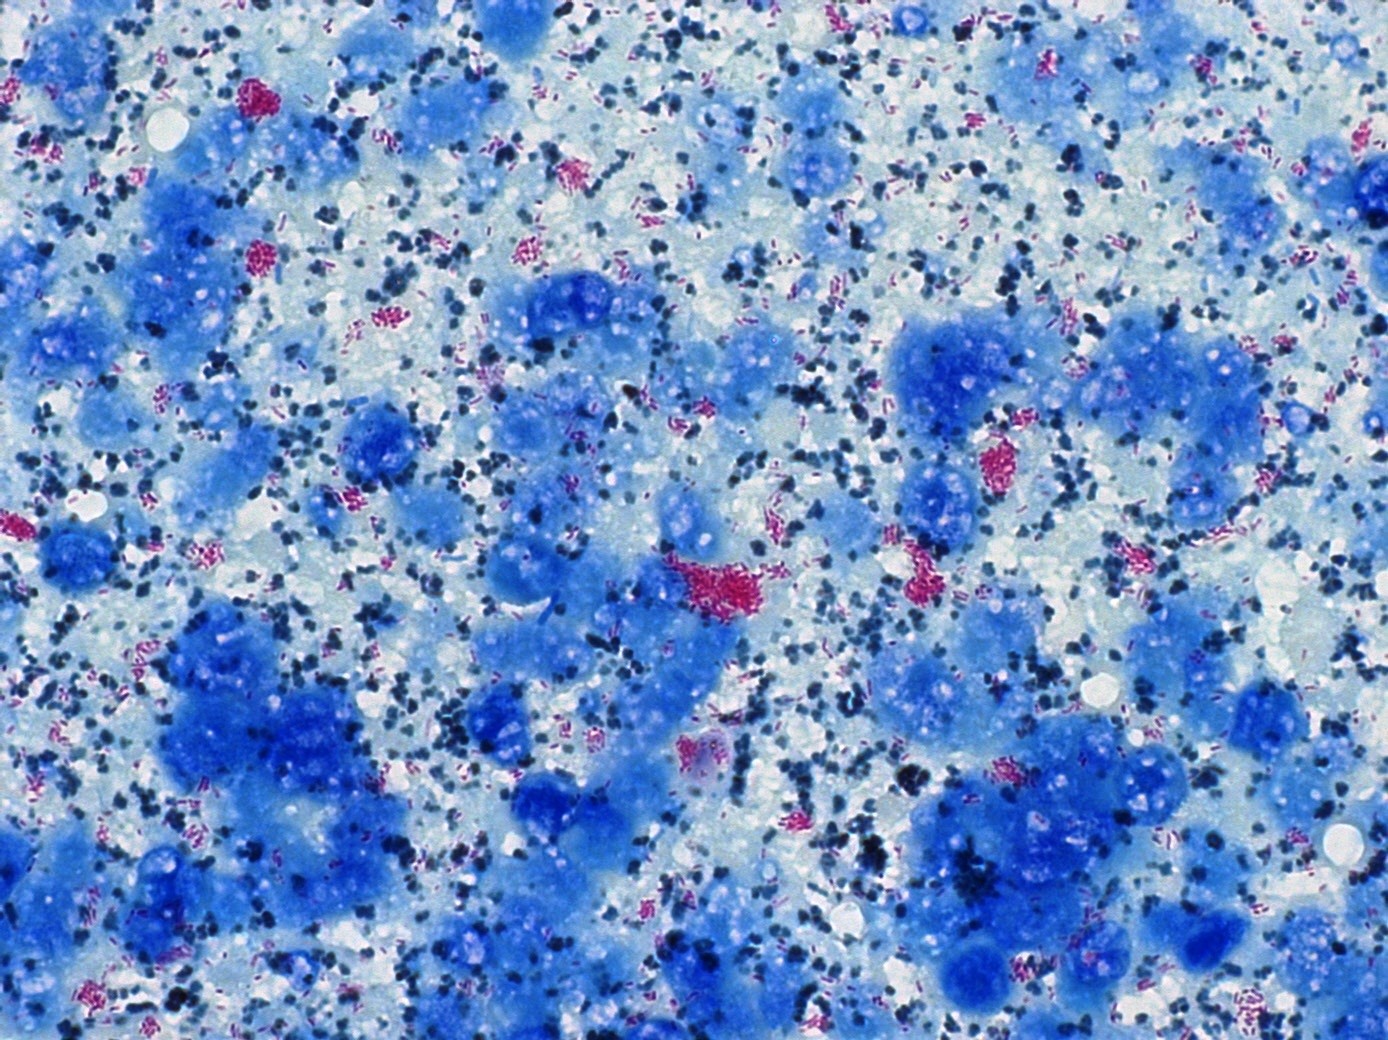 In the image above from a fine needle aspirate of a skin lesion, you see a tremendous amount of cellular debris that is picking up the methylene blue counterstain. Amongst the cellular debris are many individualized and aggregates of rod-shaped, acid-fast bacteria that appear bright